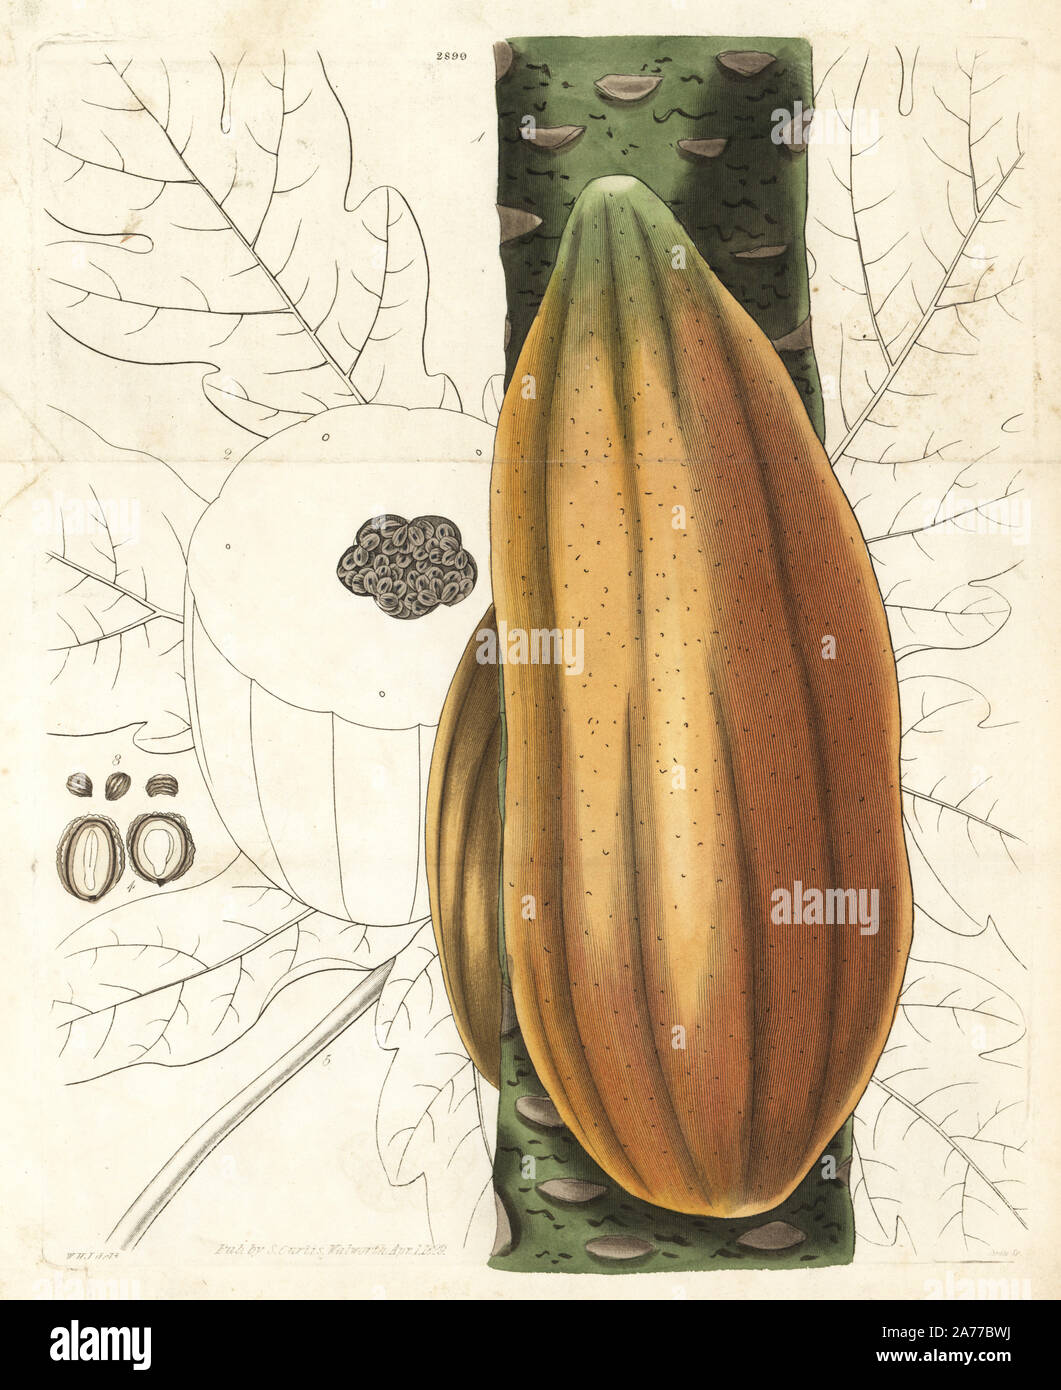 Papaw or papaya tree, Carica papaya, fruit on bough and section through fruit. Handcoloured copperplate engraving by Swan after an illustration by William Jackson Hooker from Samuel Curtis's 'Botanical Magazine,' London, 1829. Stock Photo